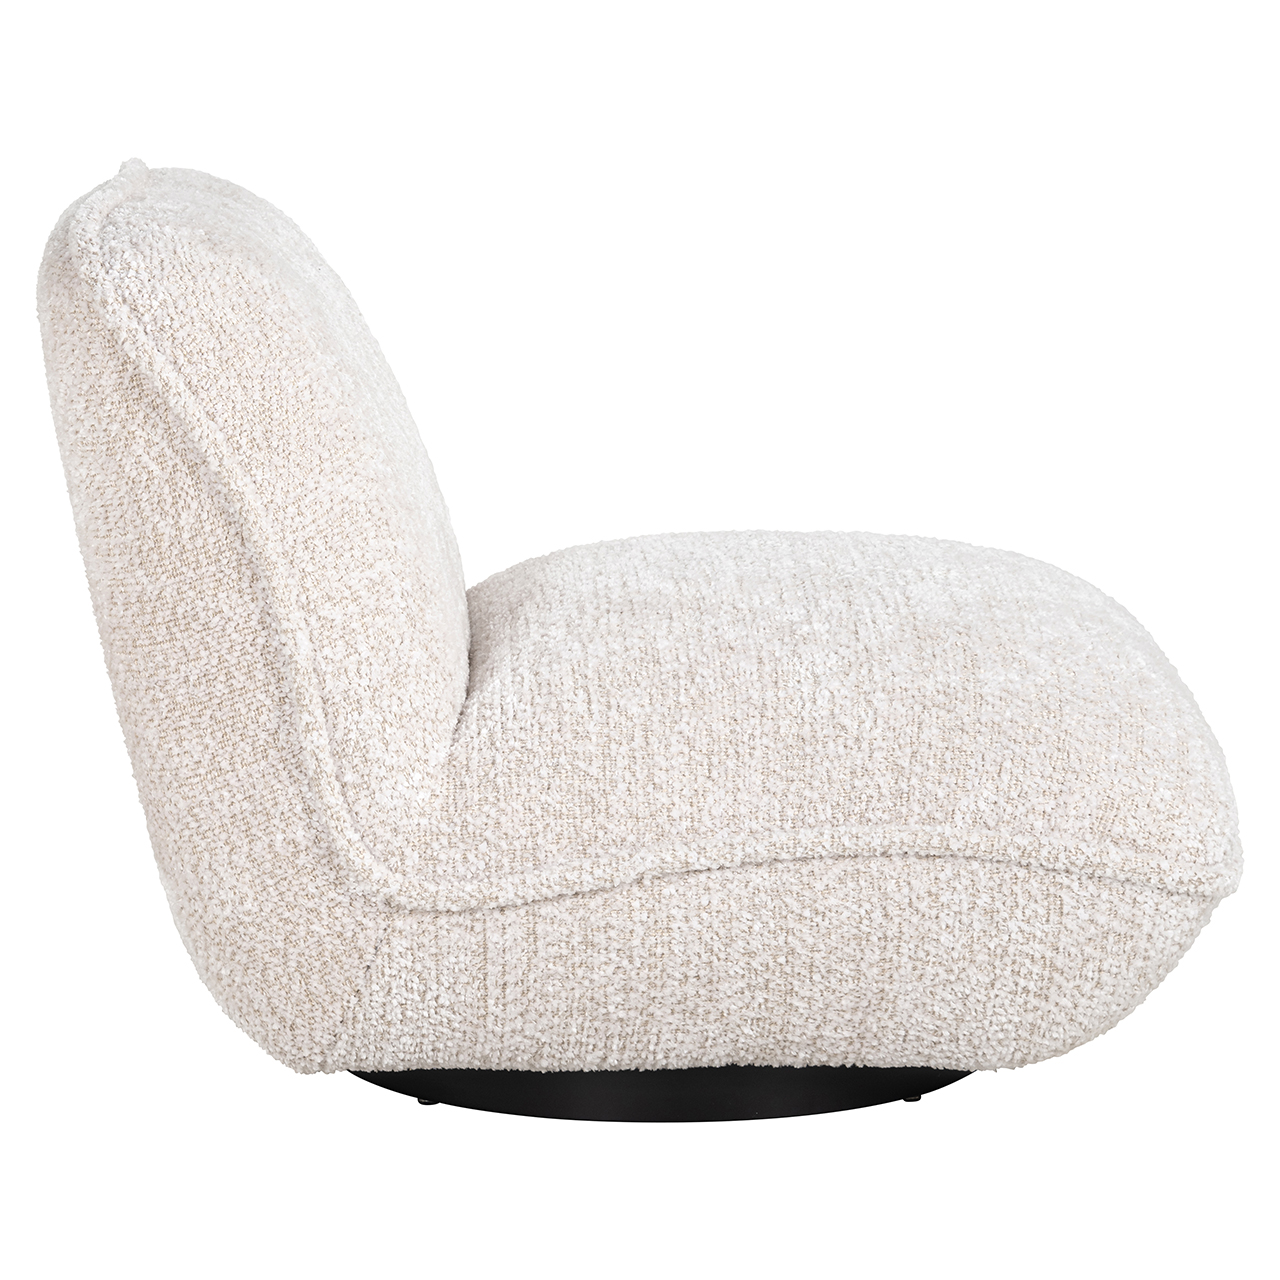 Fauteuil Ophelia lovely cream (Be Lovely 11 Cream)